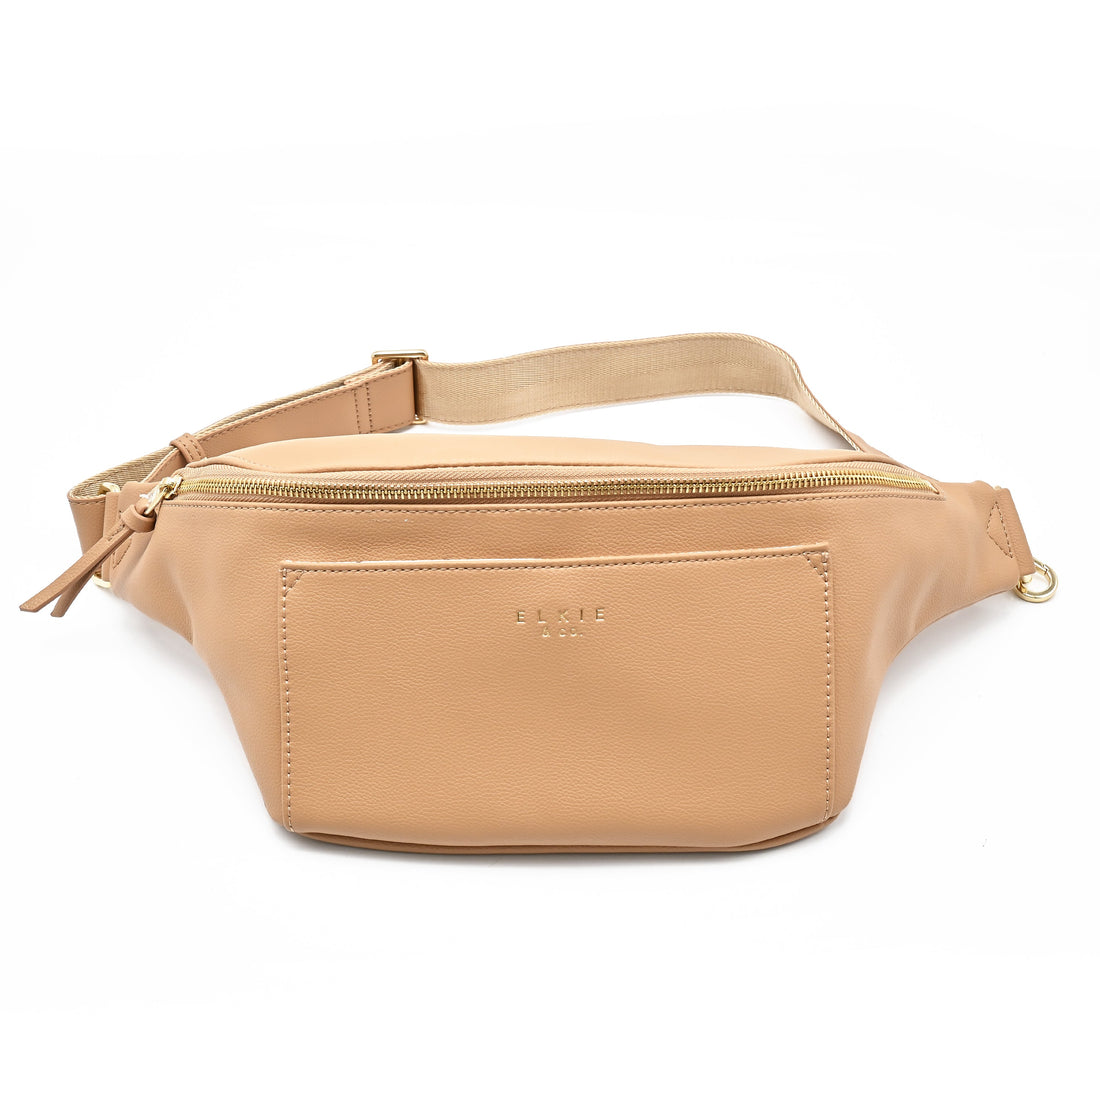 Tan Elkie fanny pack front view